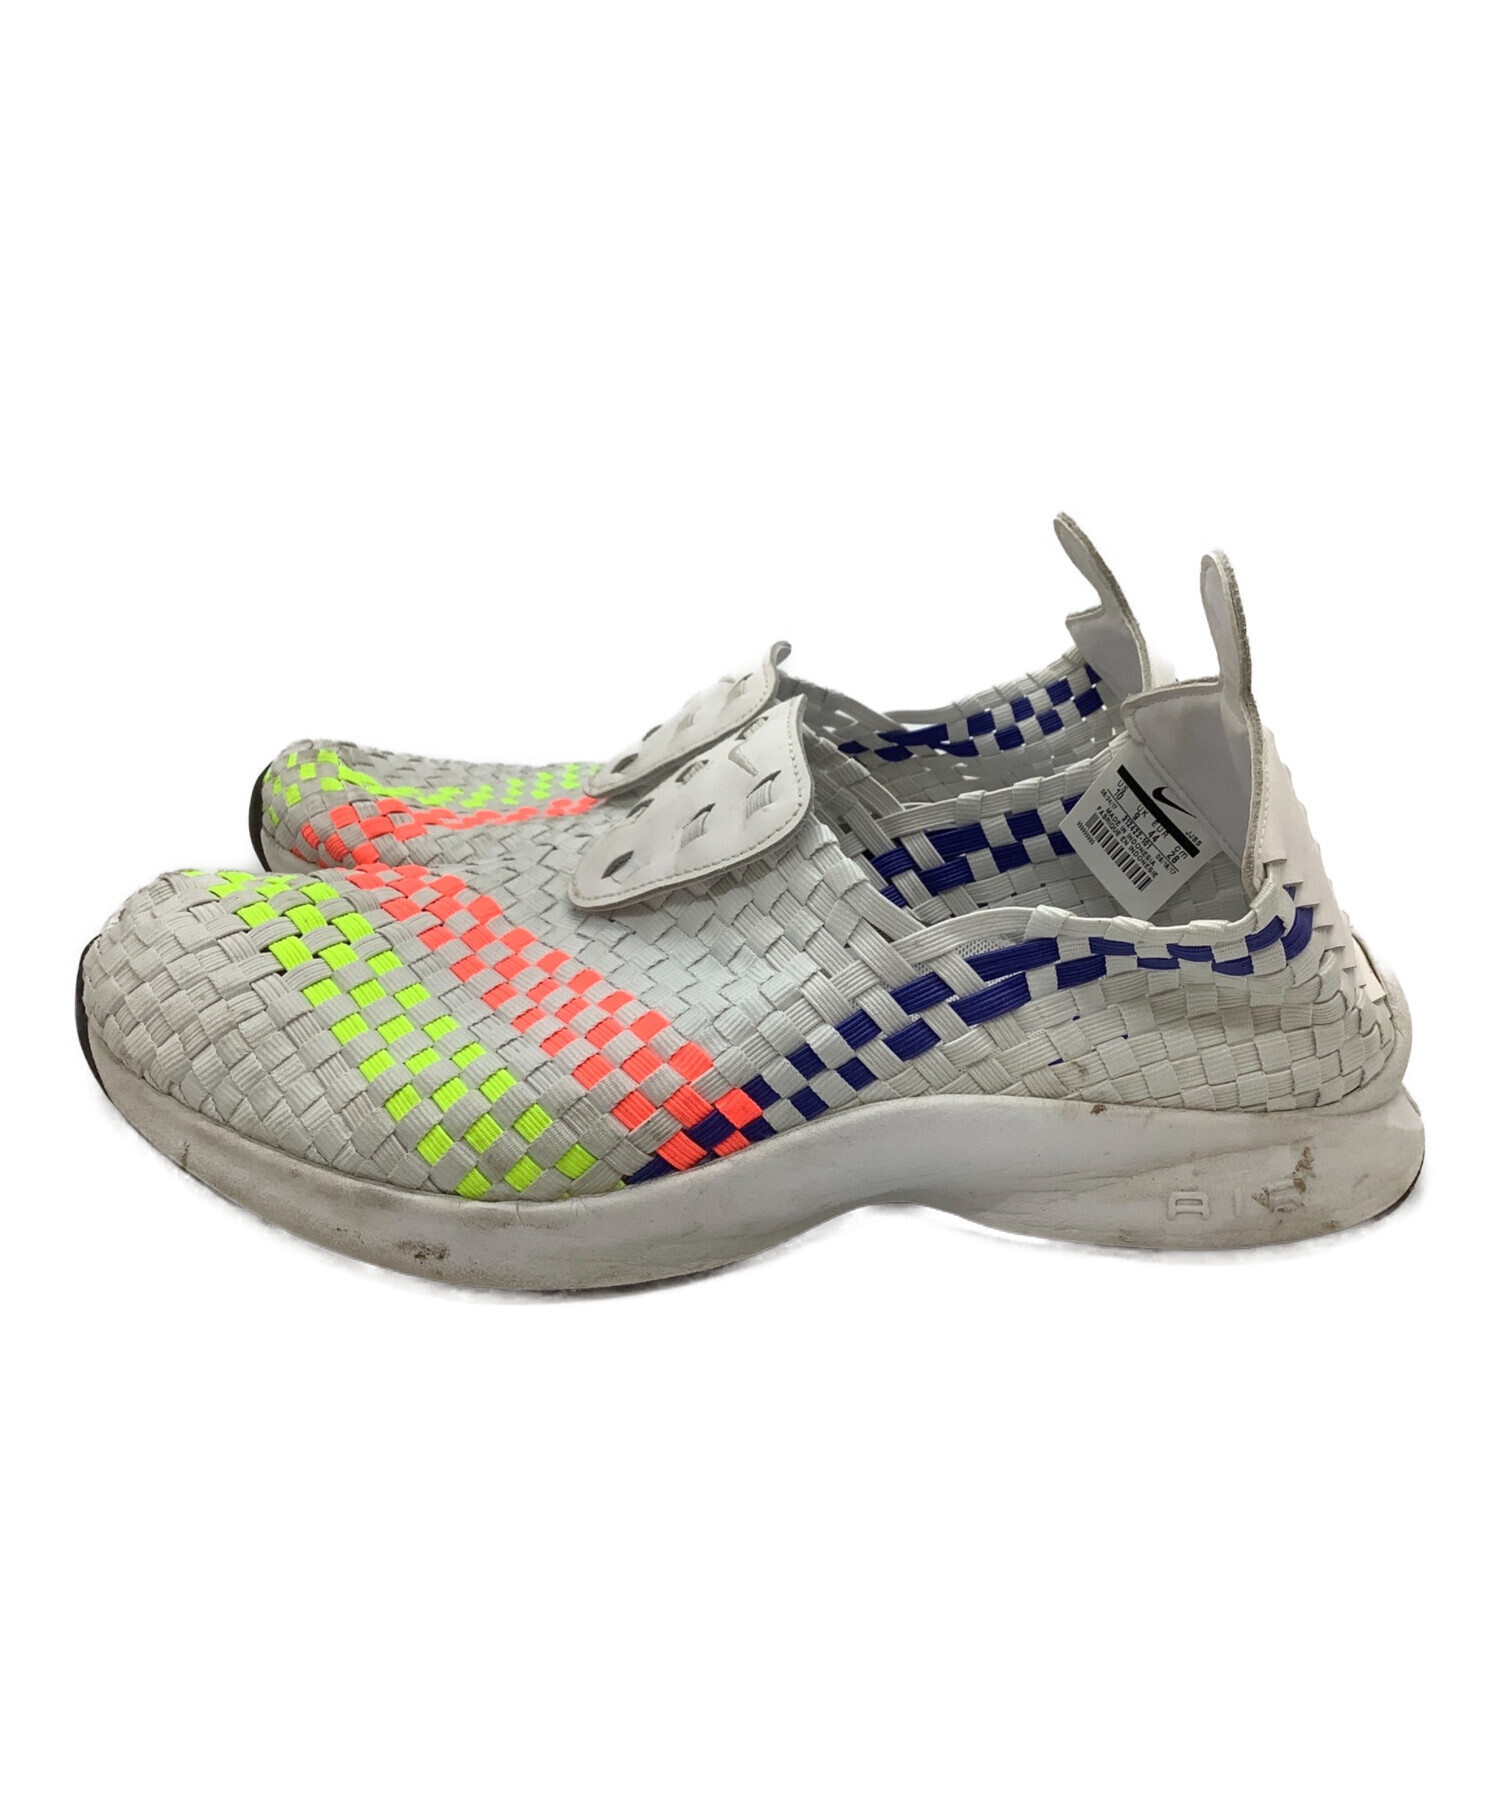 NIKE AIR WOVEN 609065 003 28cm レア　ヴィンテージエアフォース